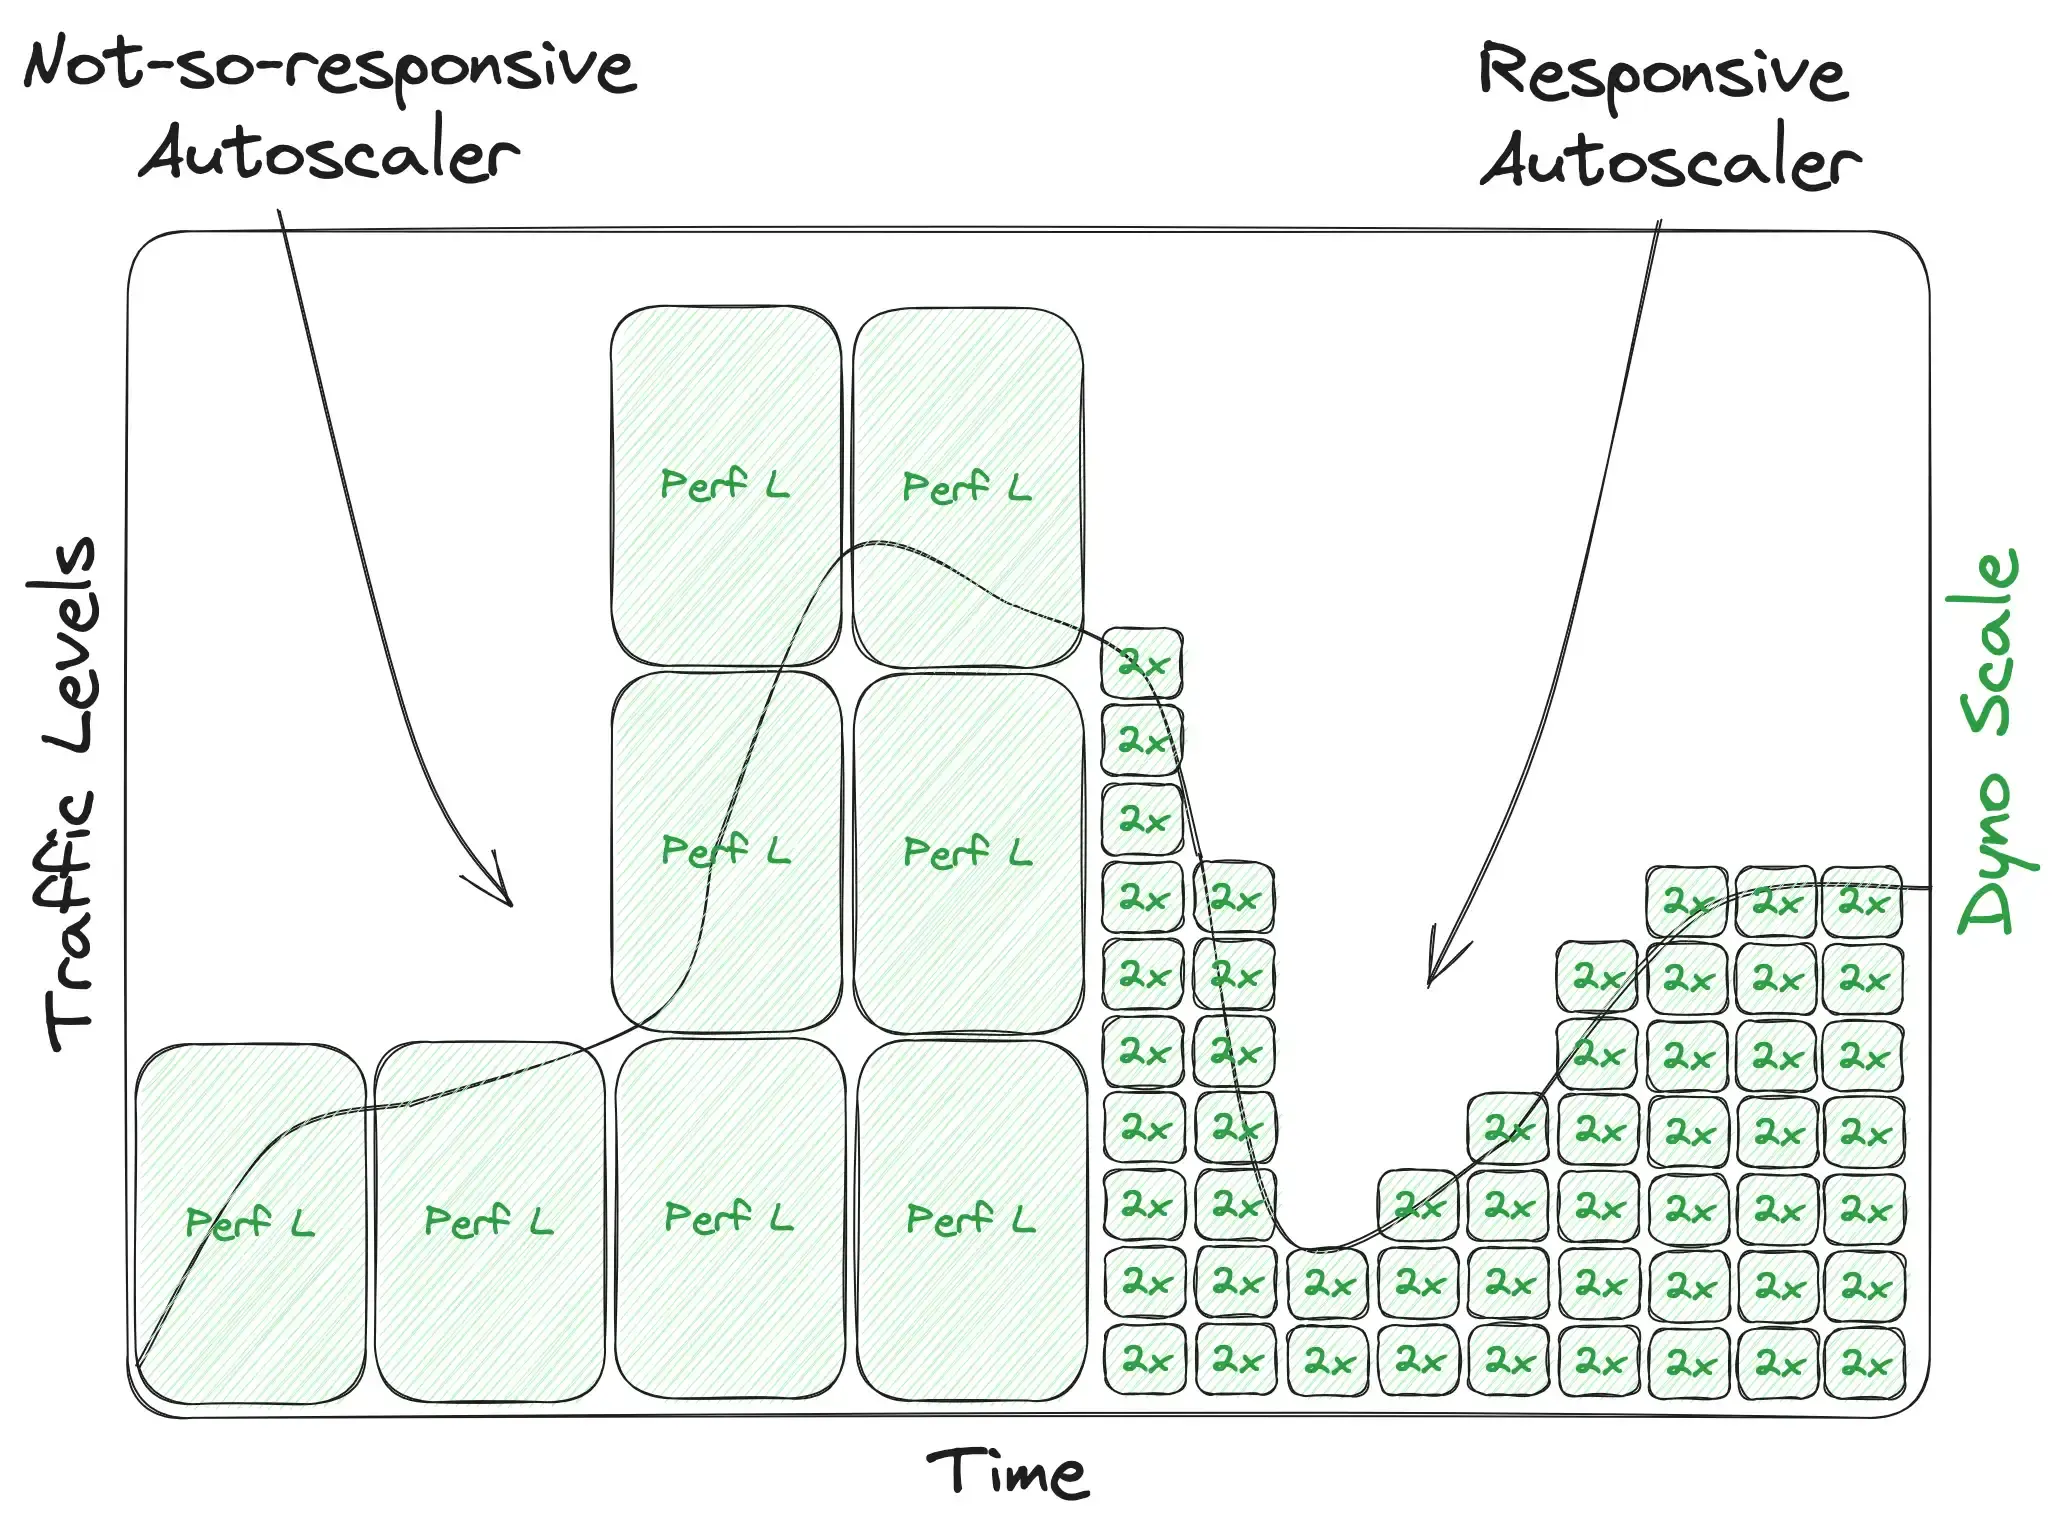 Comparing Heroku dynos with regard to their responsiveness and modularity to scaling